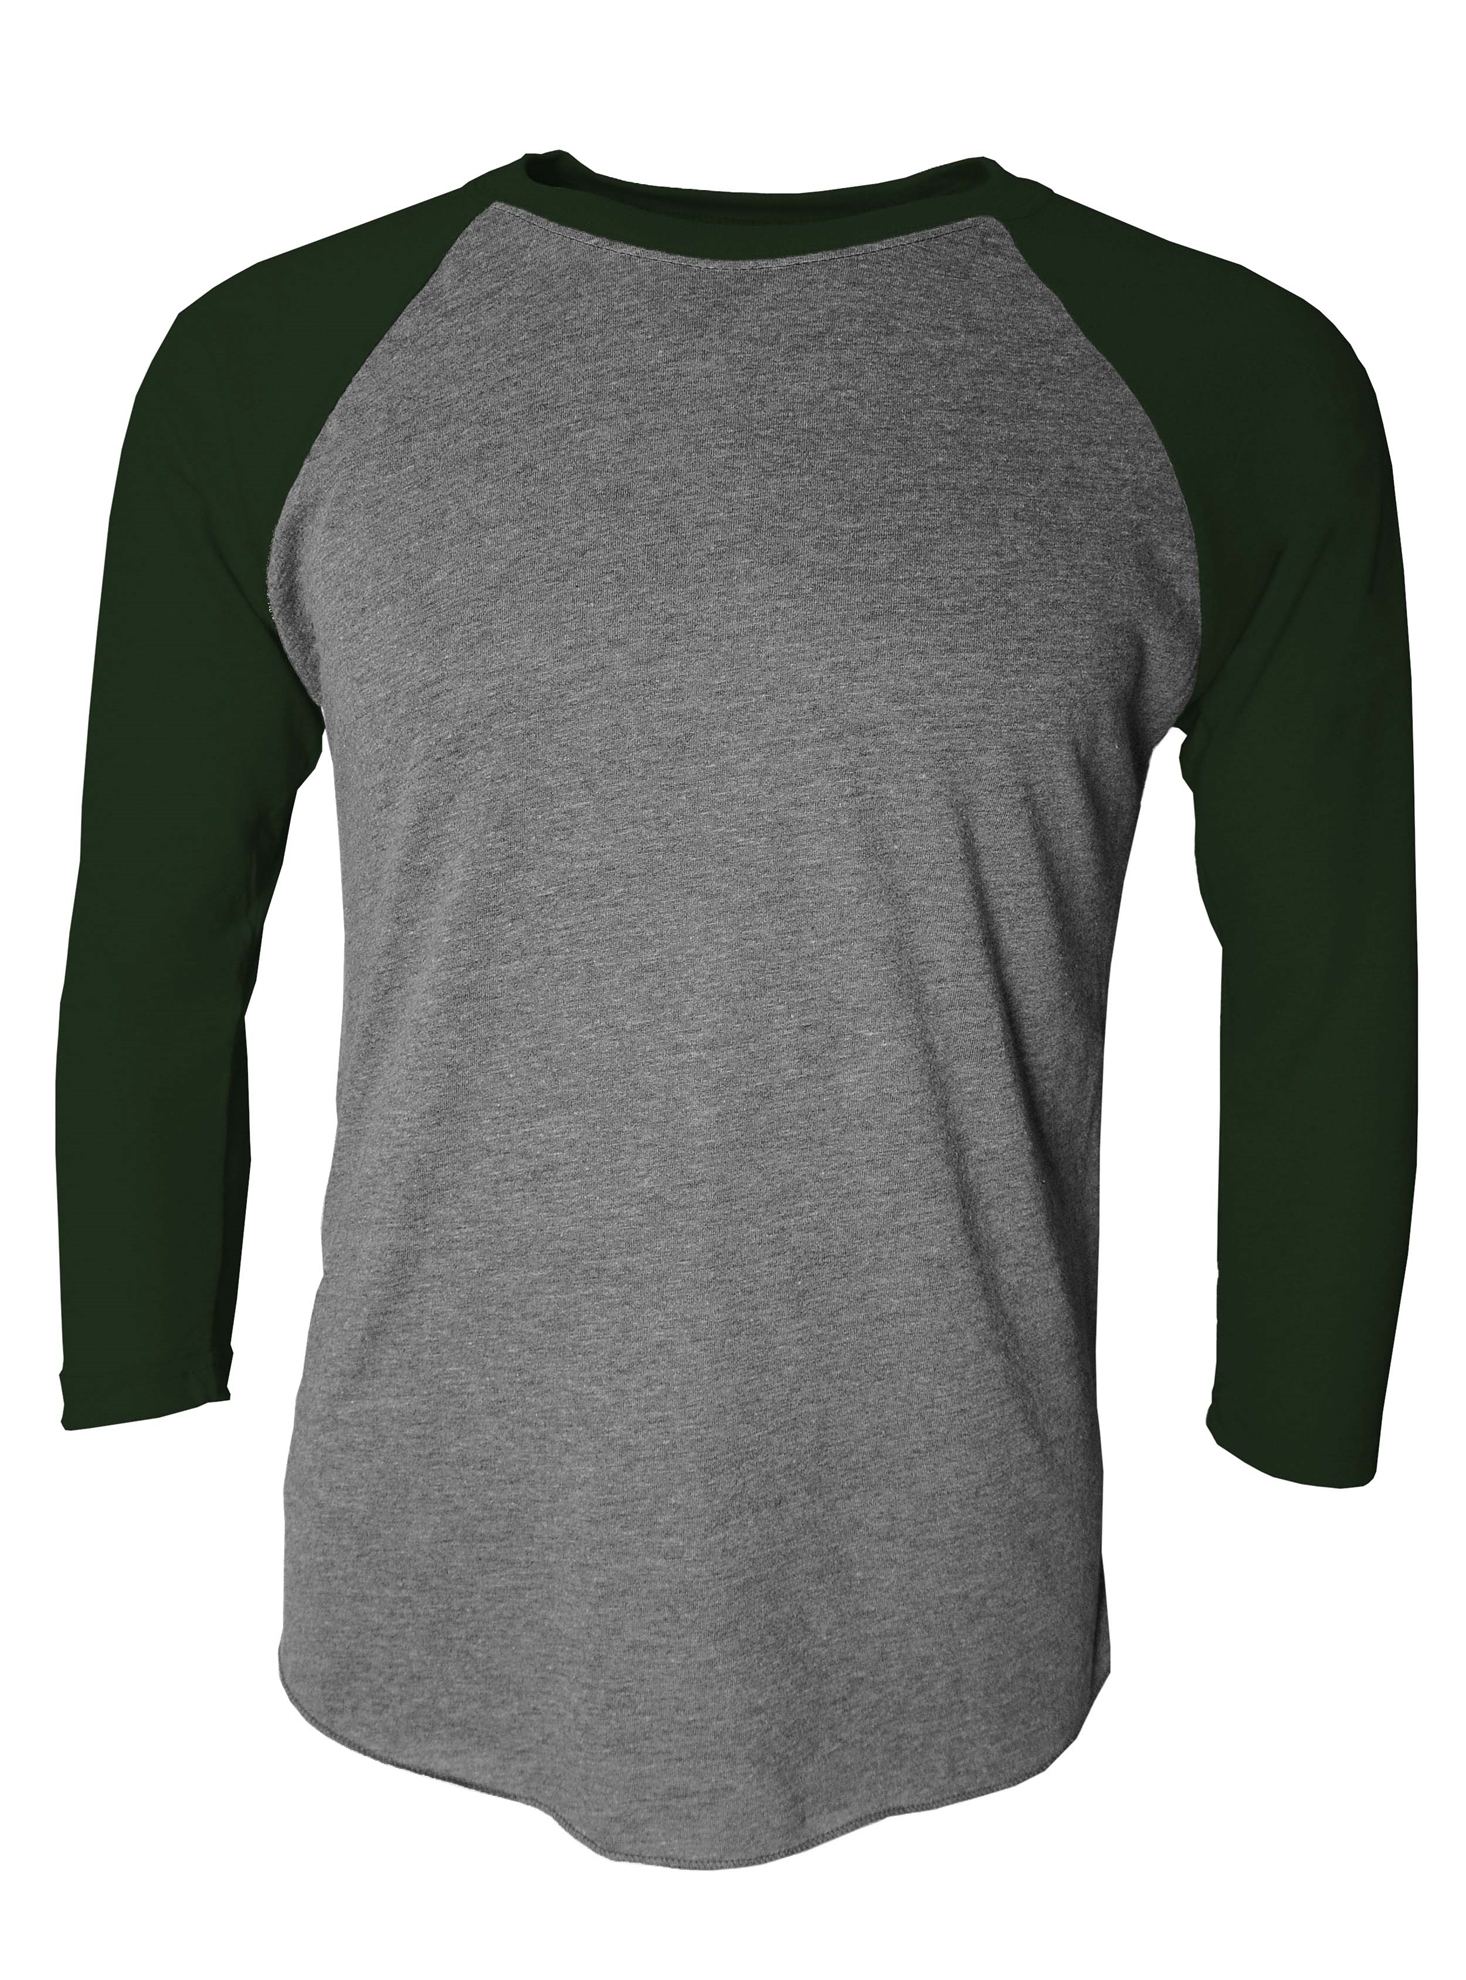 click to view SPORTS GREY/DK.GREEN